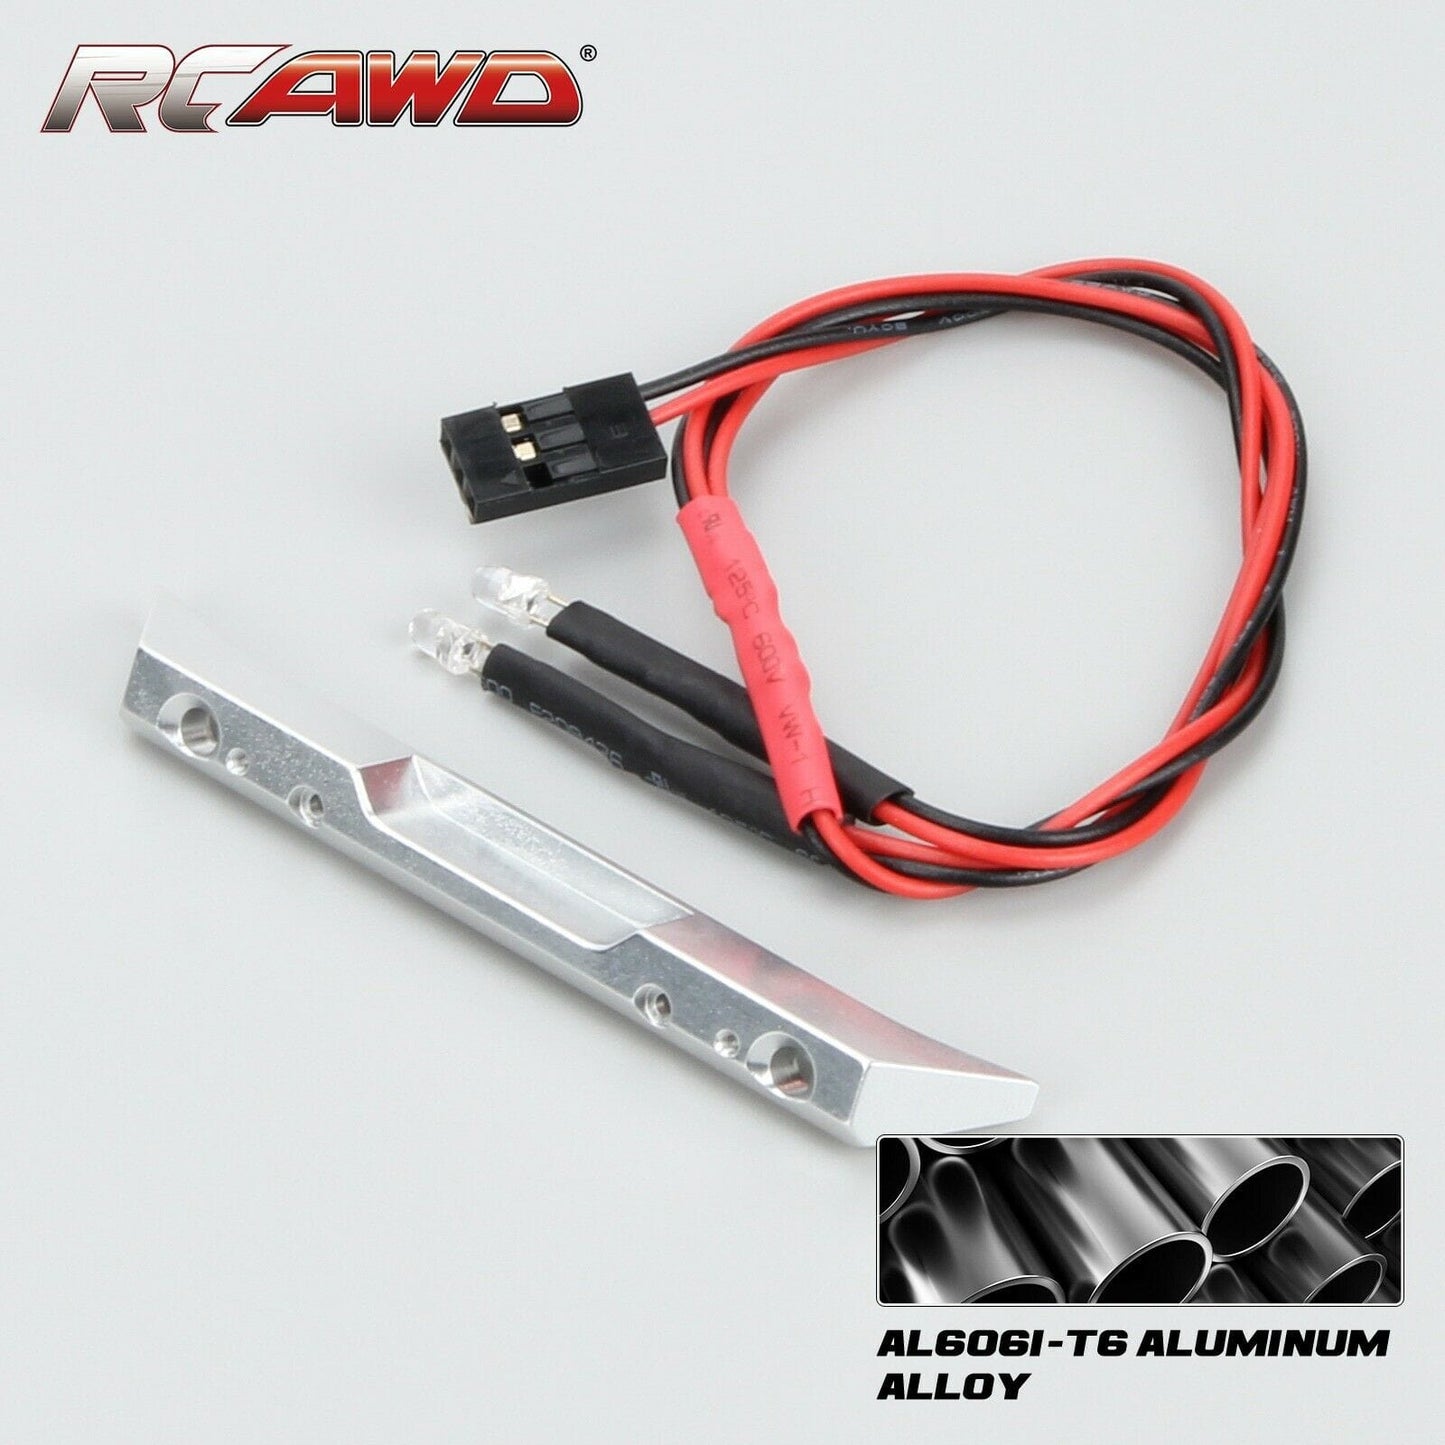 RCAWD SCX24 JEEP aluminium rear bumper with led lights SCX2445 - RCAWD